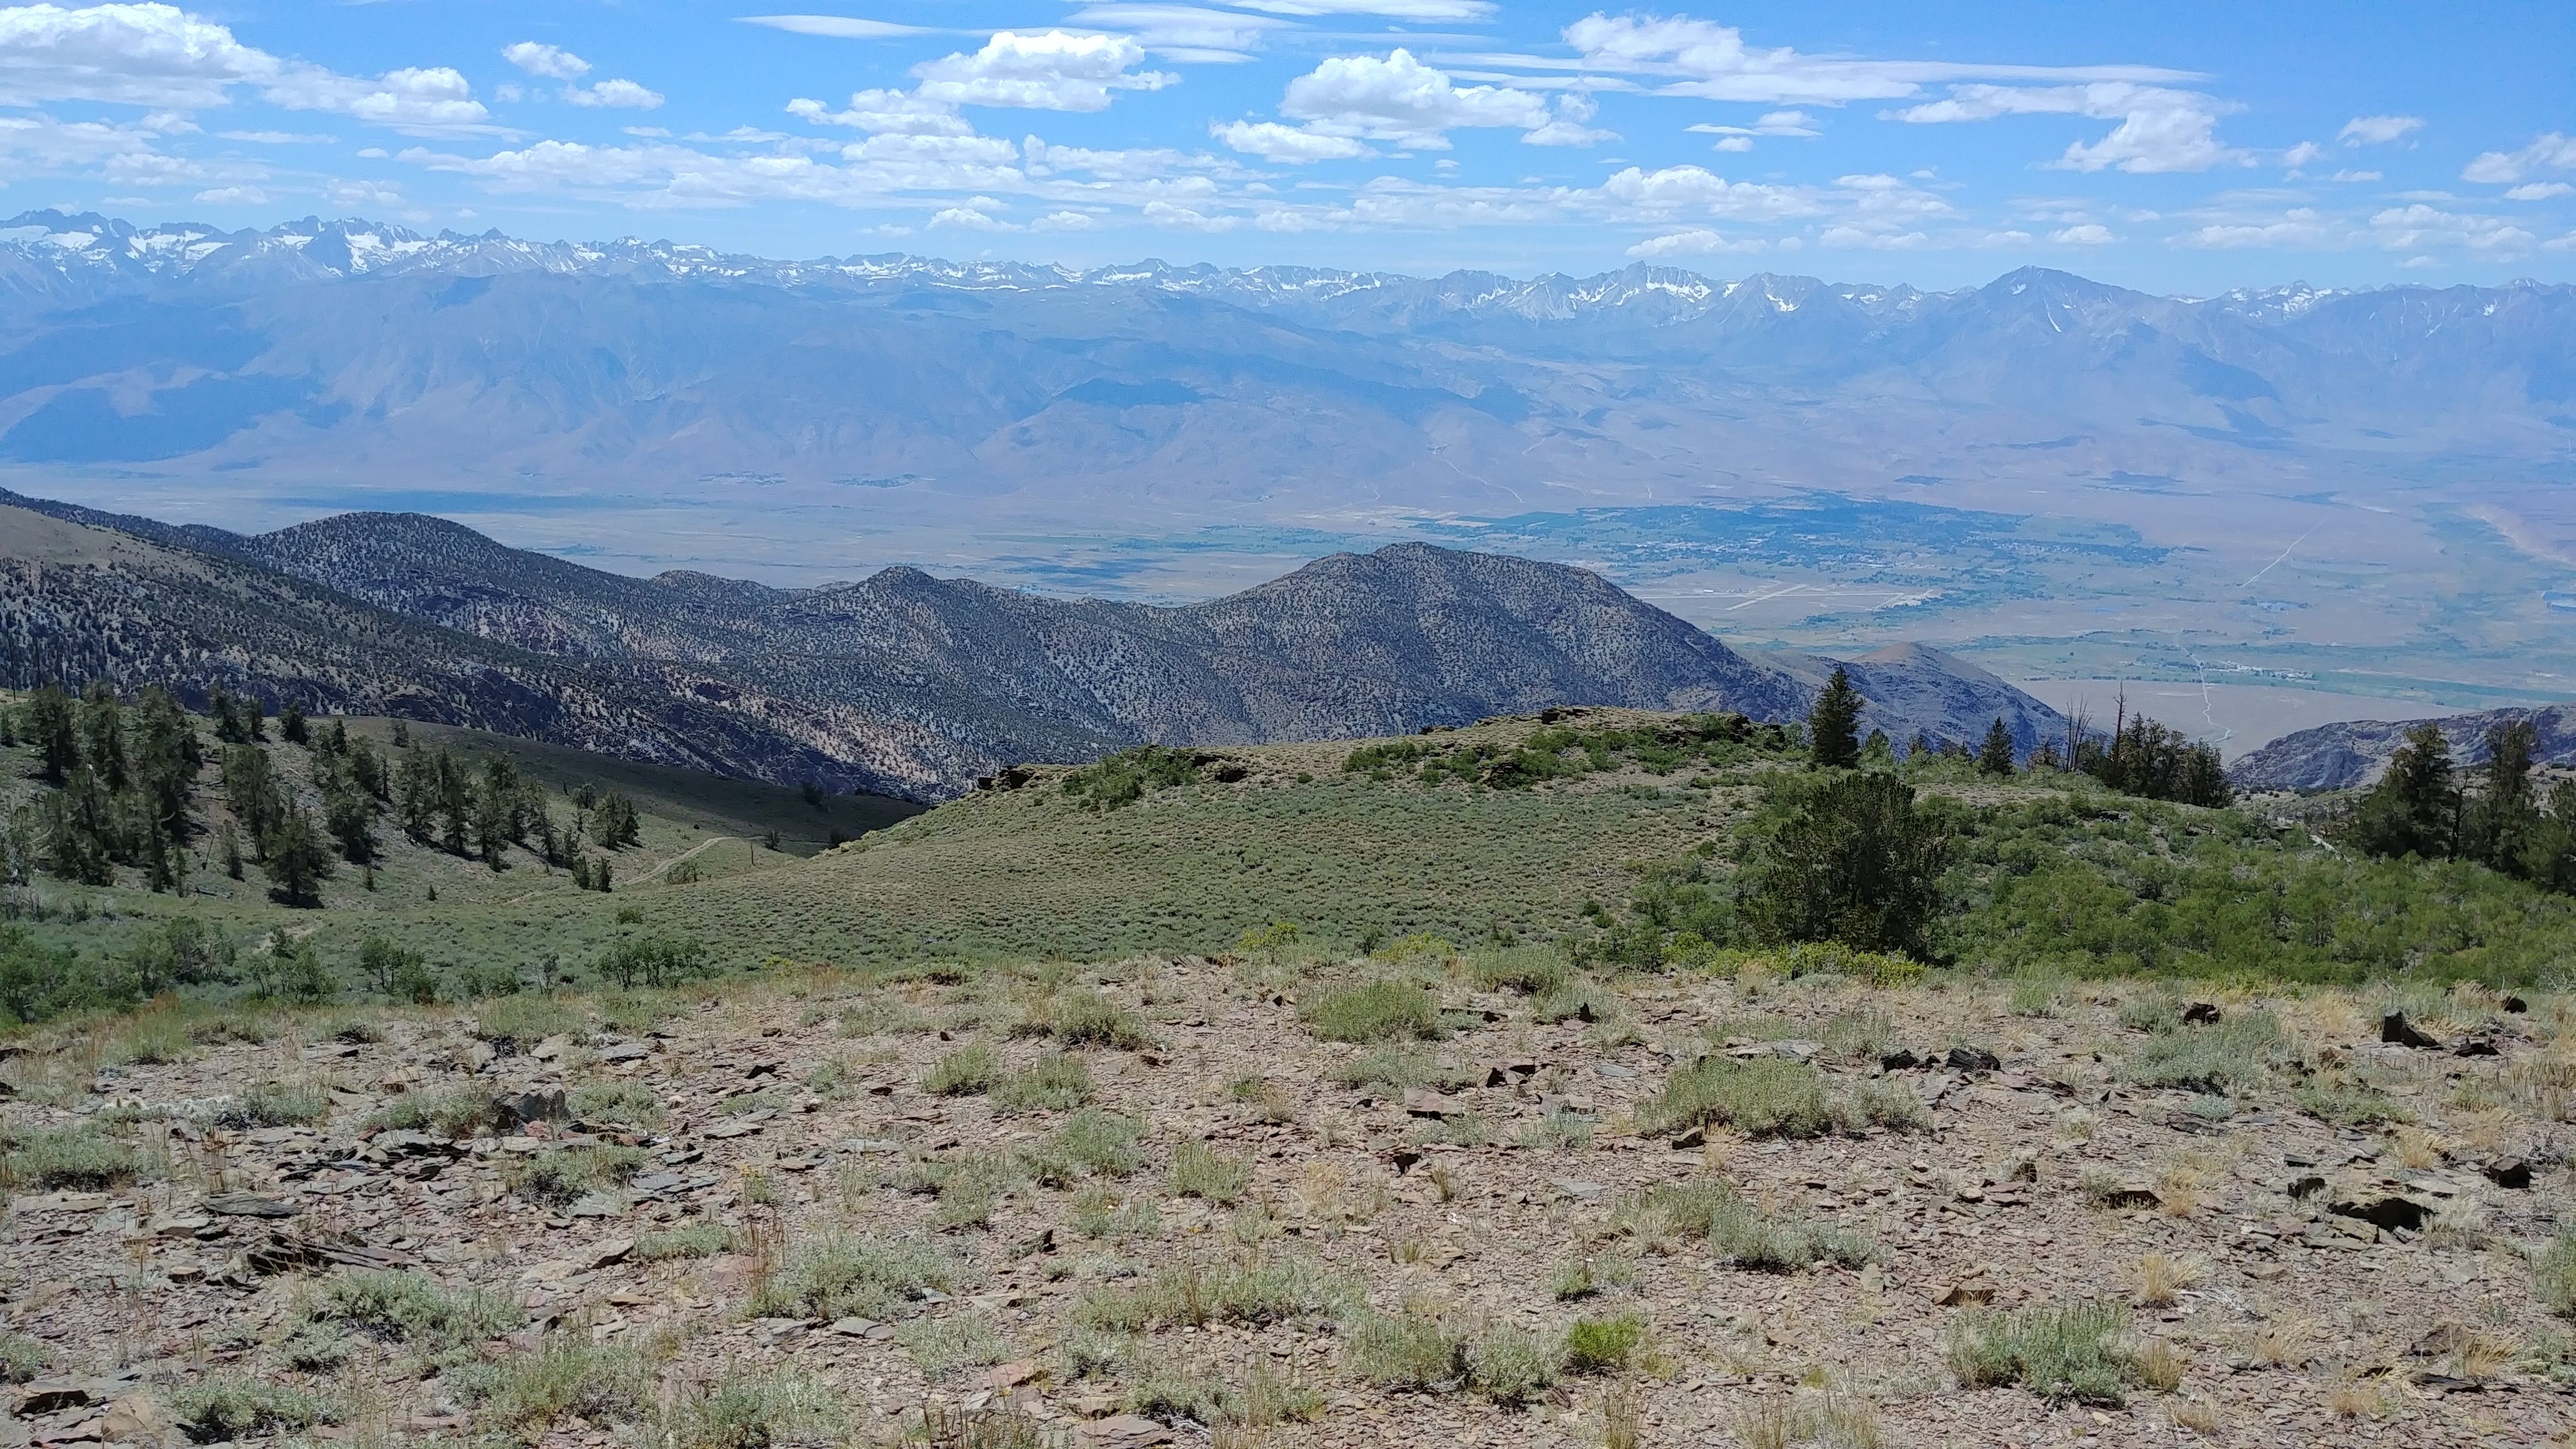 Owens Valley from the Grandview area.